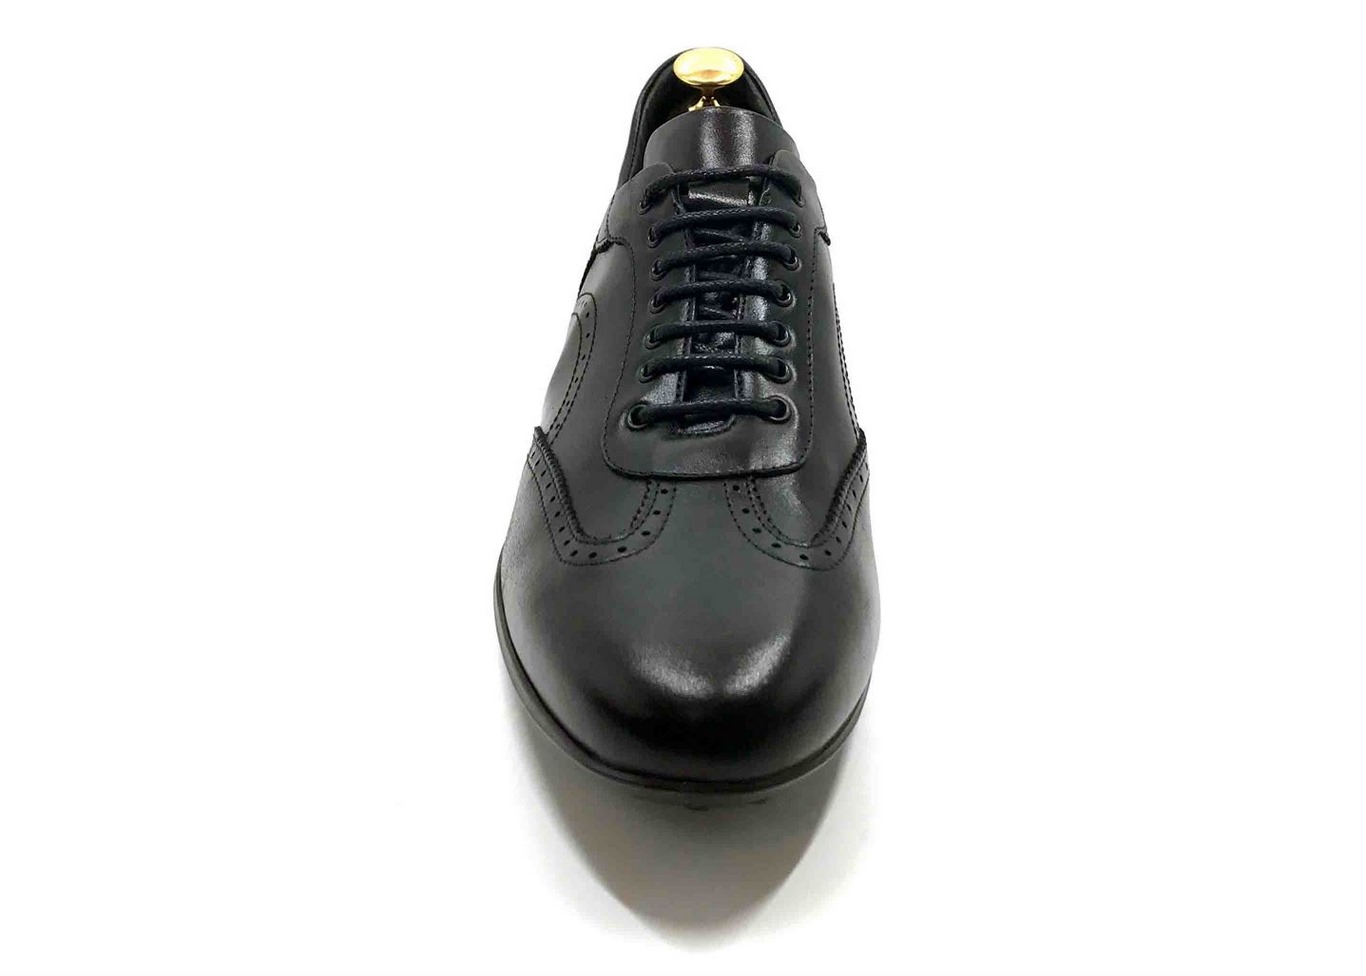 Smart Sneaker in Black calfskin with extractable innersole